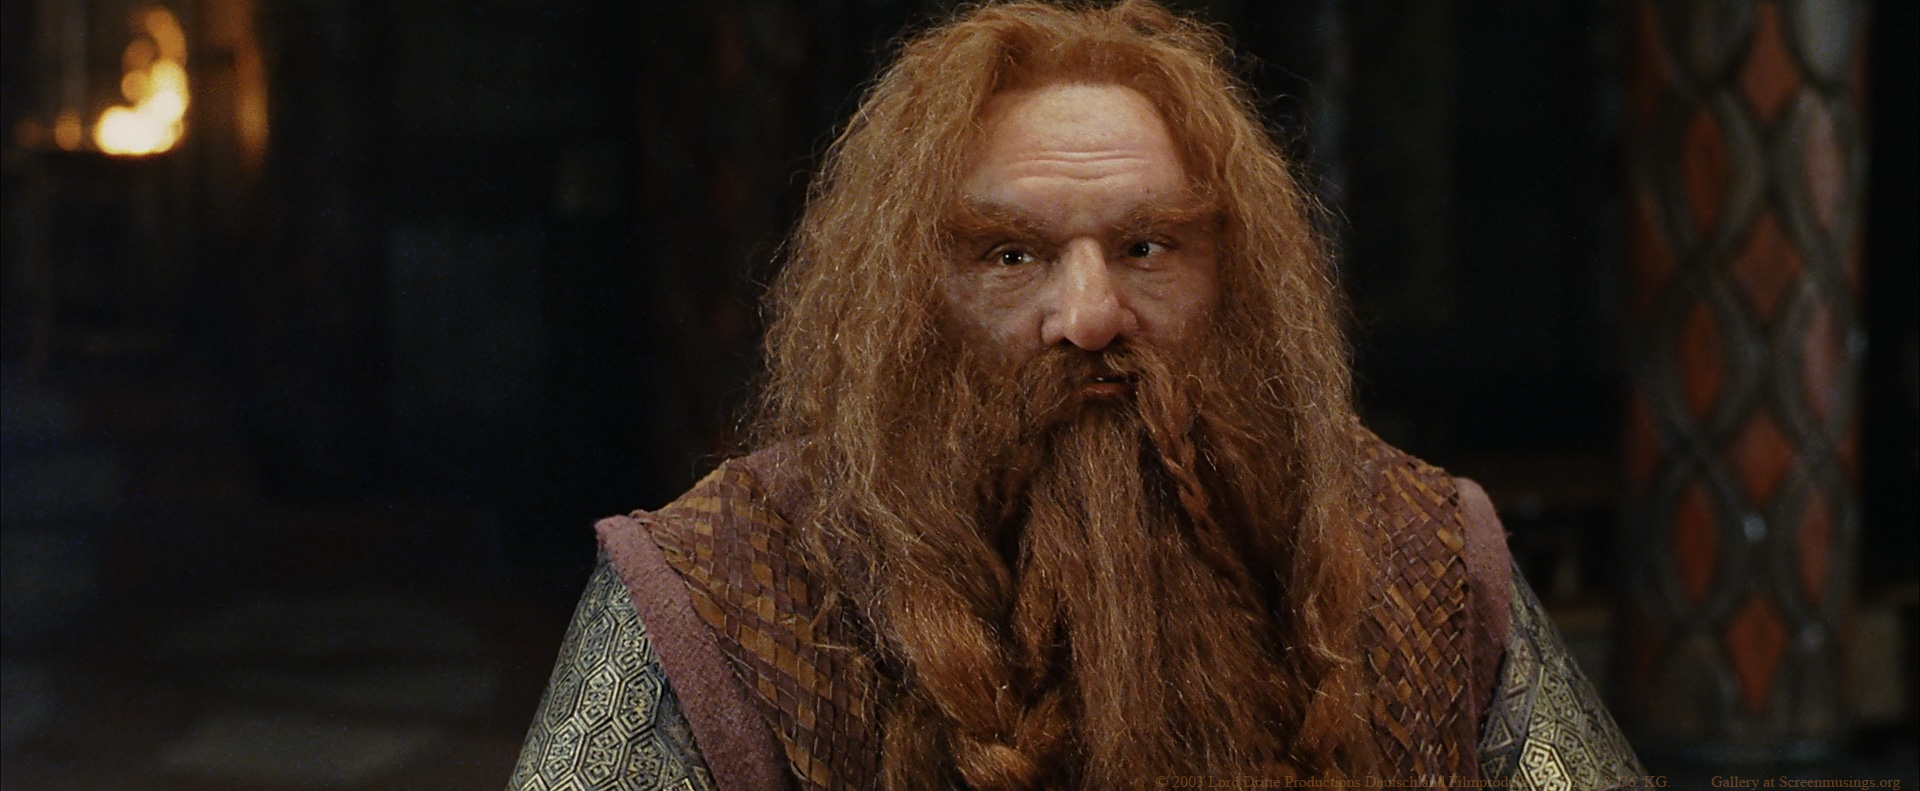 John Rhys-Davies in The Lord of the Rings: The Return of the King